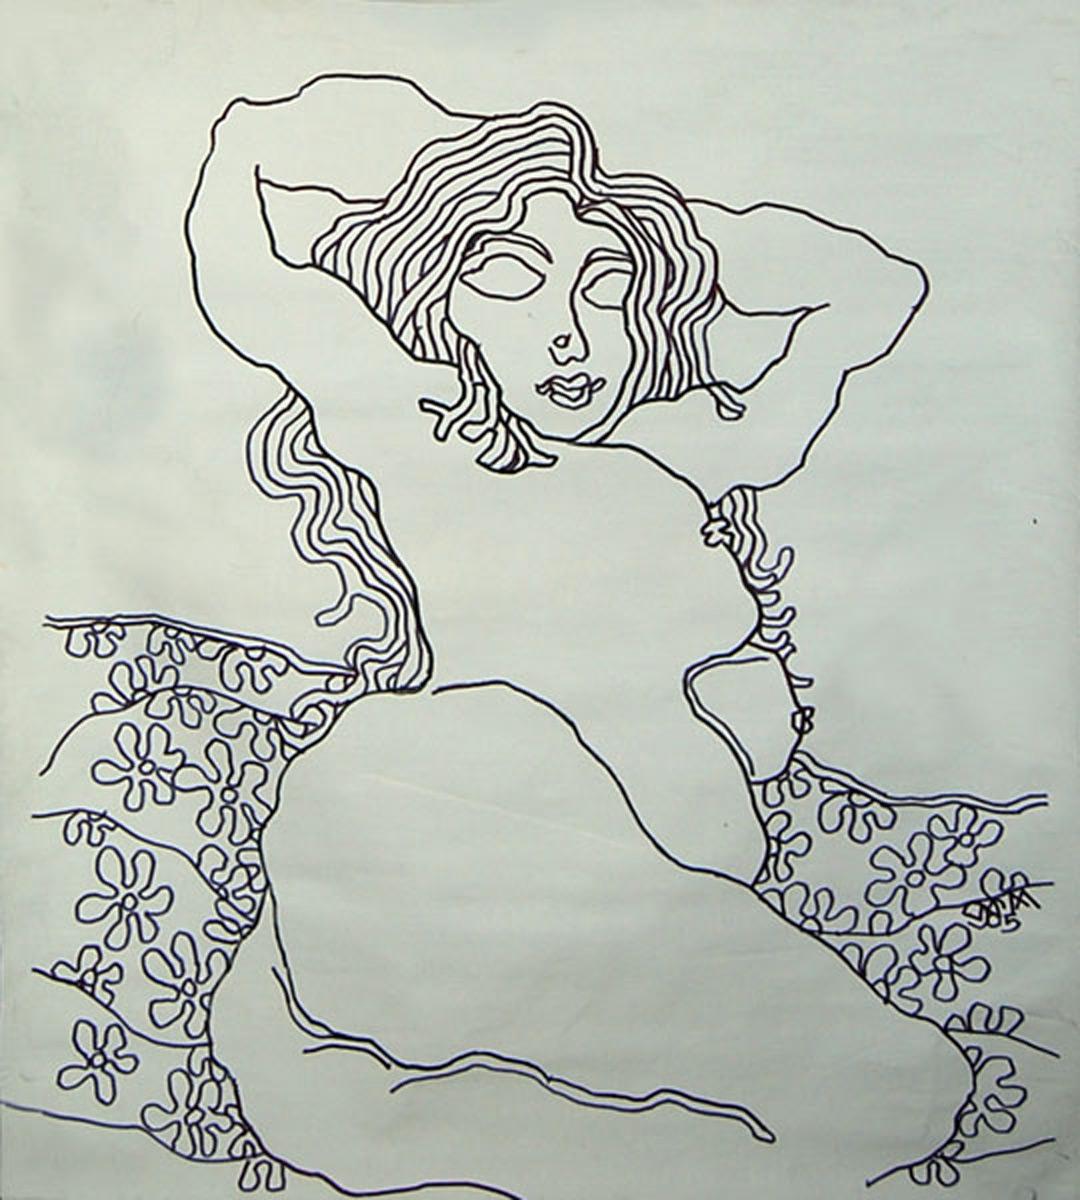 Lady with Flowers, Nude Drawing, Ink on canvas by Indian Modern Master "In Stock" - Art by Prakash Karmarkar